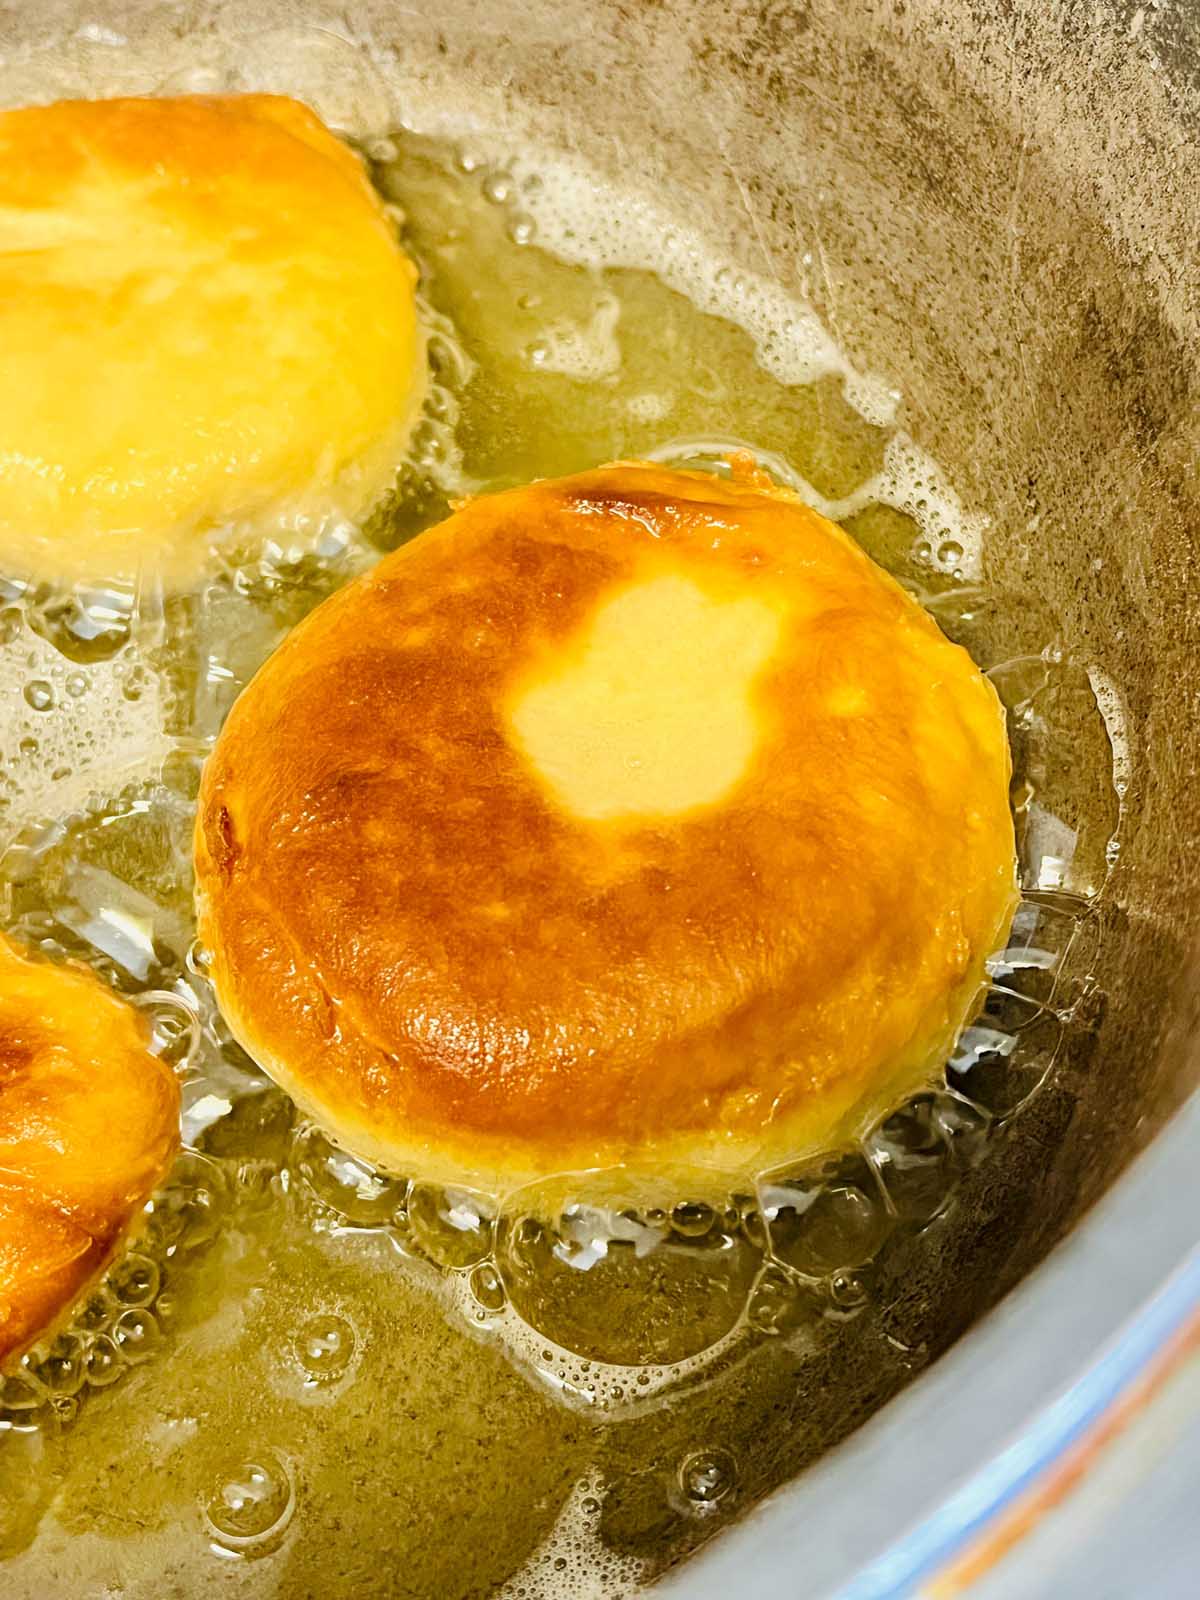 Cooked donut in a frying pan.